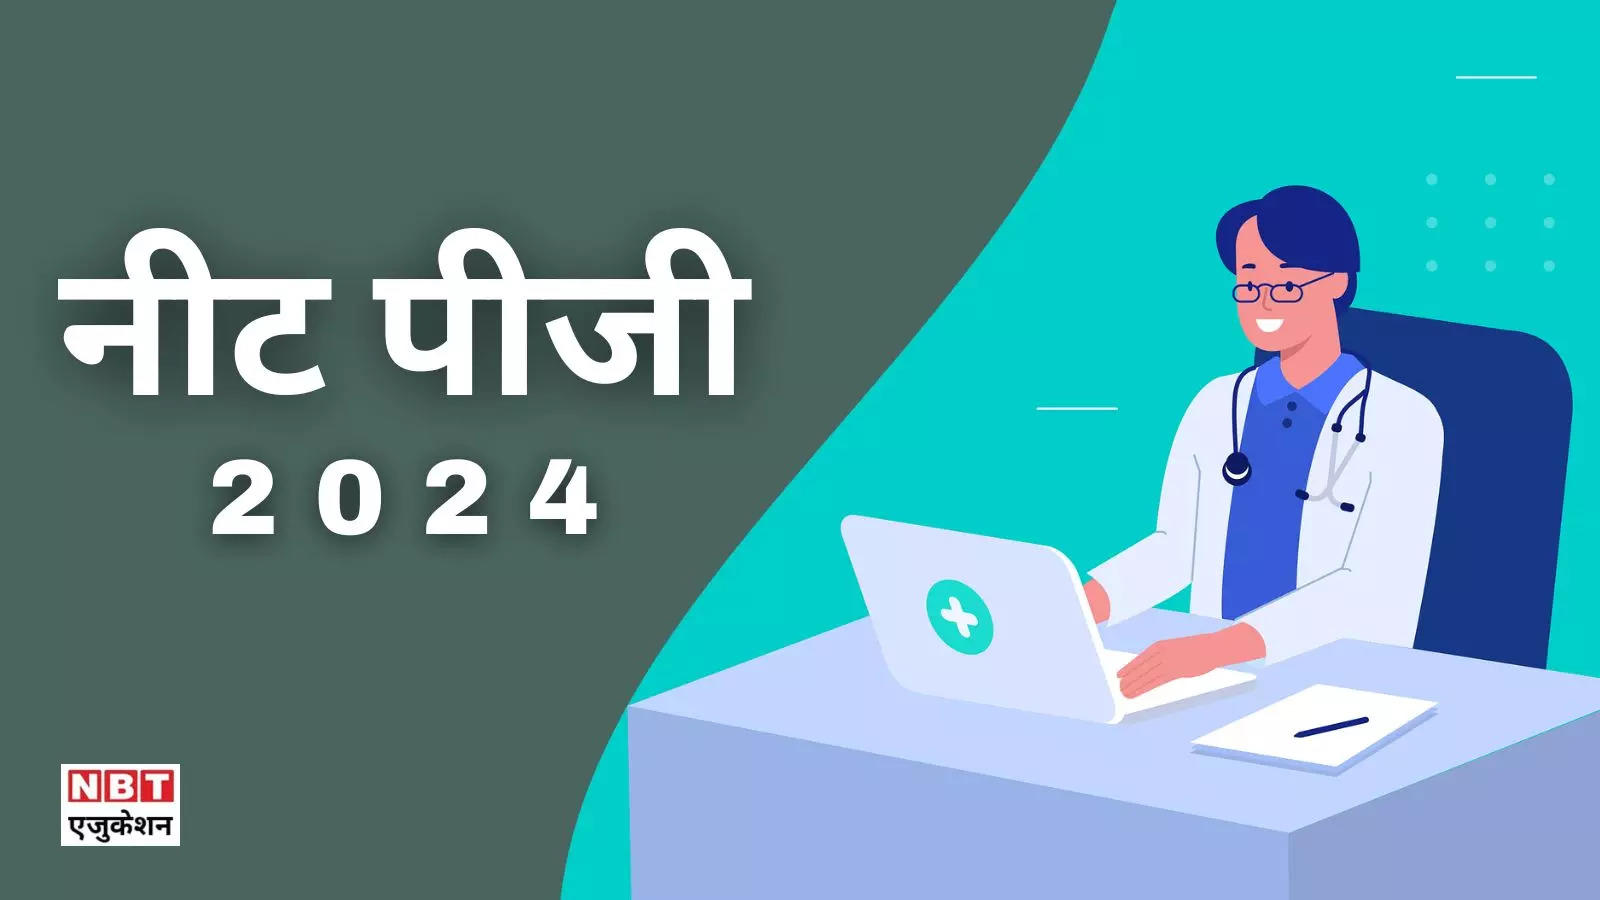 NEET PG 2024: NEET PG exam will be held in August, computer will select the questions